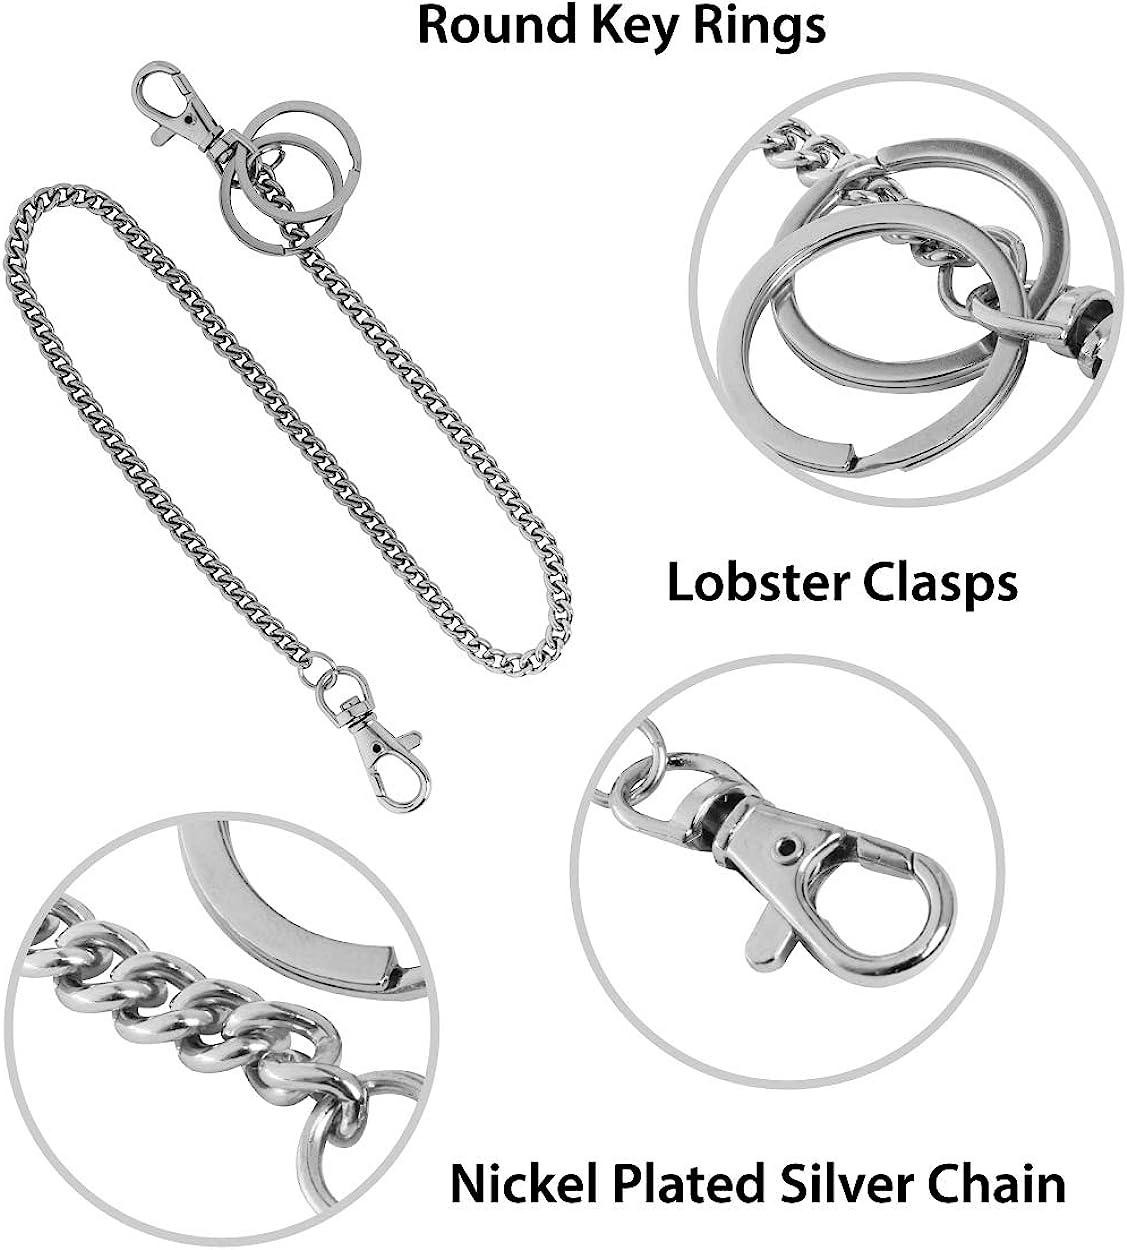 18 Silver Nickel Plated Pocket Keychain String with Both Ends Lobster Claw  Clasp Trigger Snap Handle for Belt Loop, Purse Handbag Strap, Keys, Wallet,  and Traveling